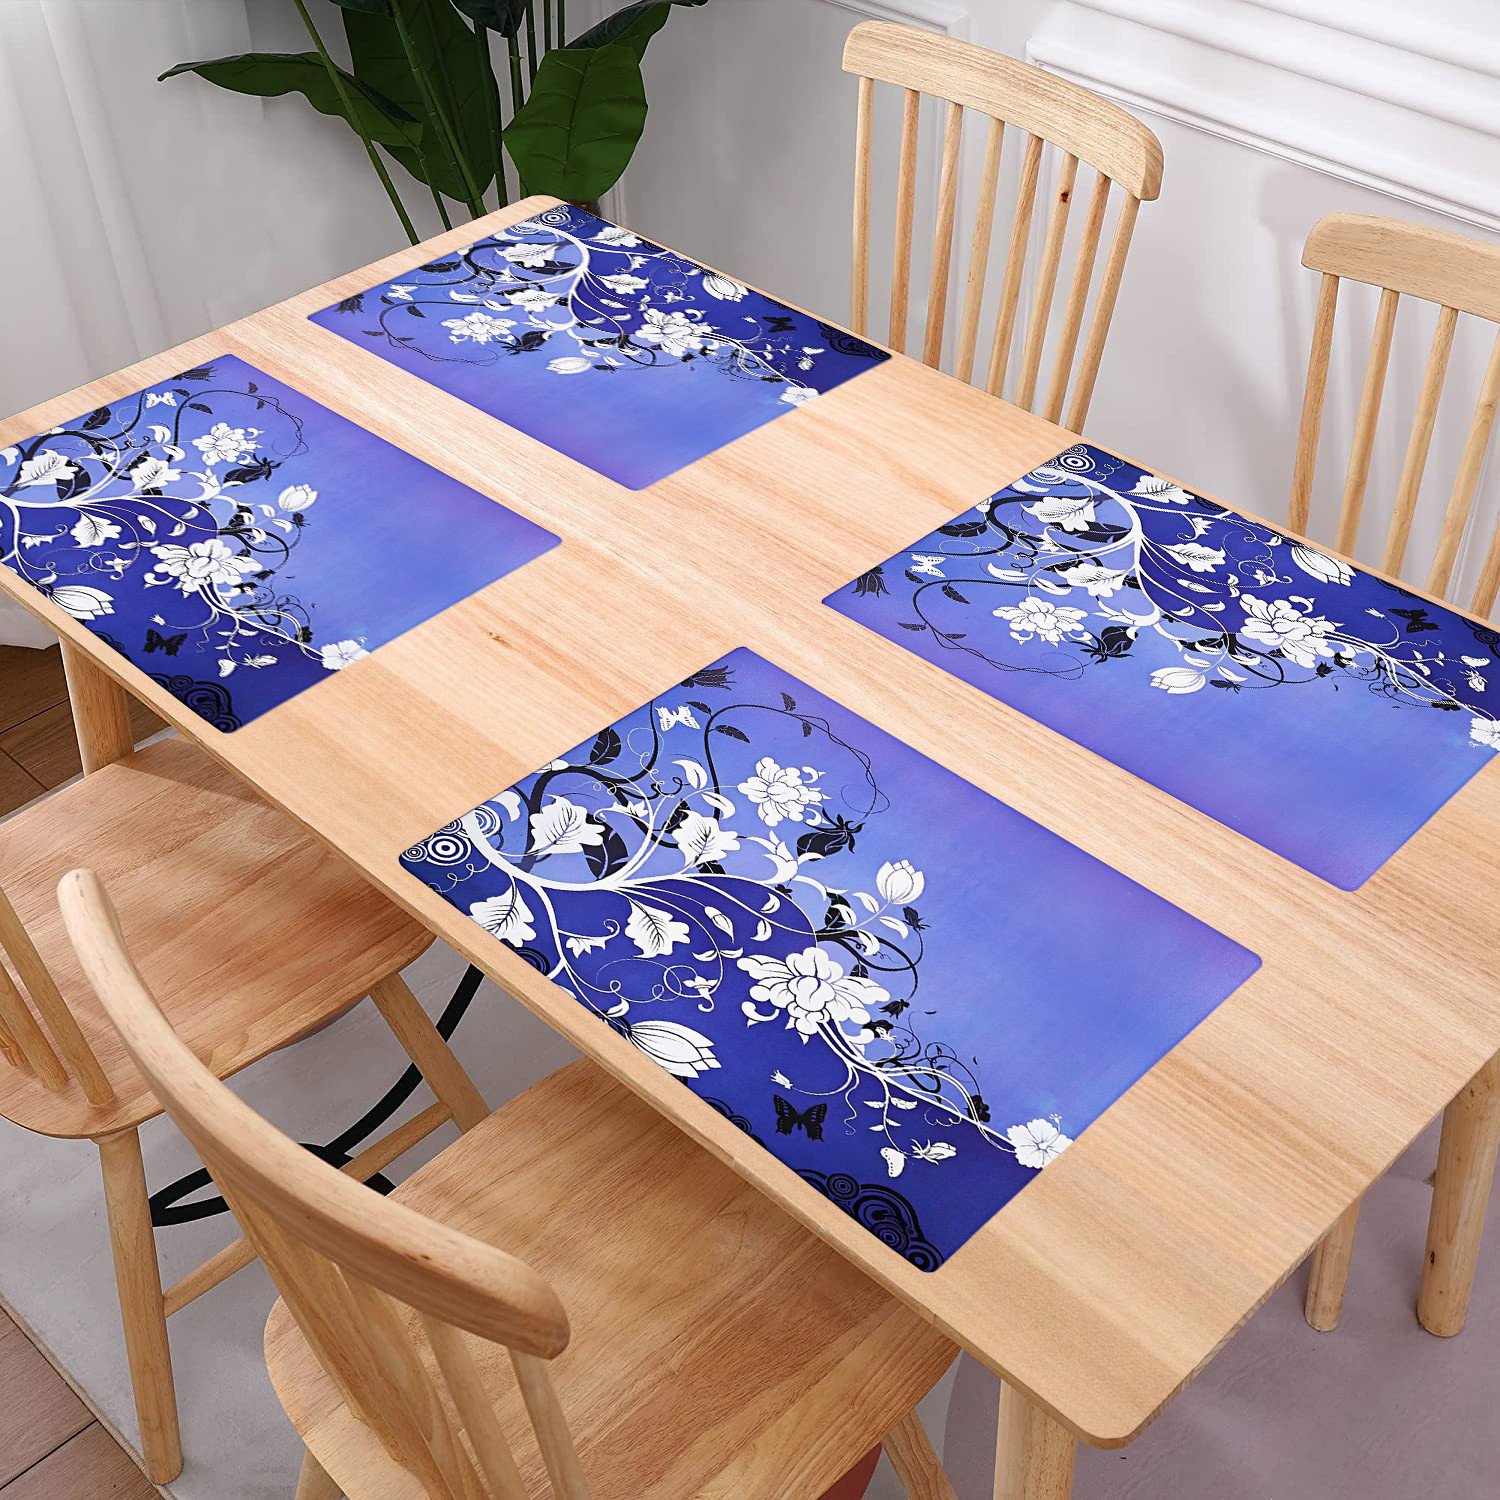 Kuber Industries Dining Table Mat | PVC Blue & White Flower Print | Table Mat | Placemats for Kitchen | Refrigerator Liners Mats | Shelf Liner Mat | Set of 6 | Multicolor